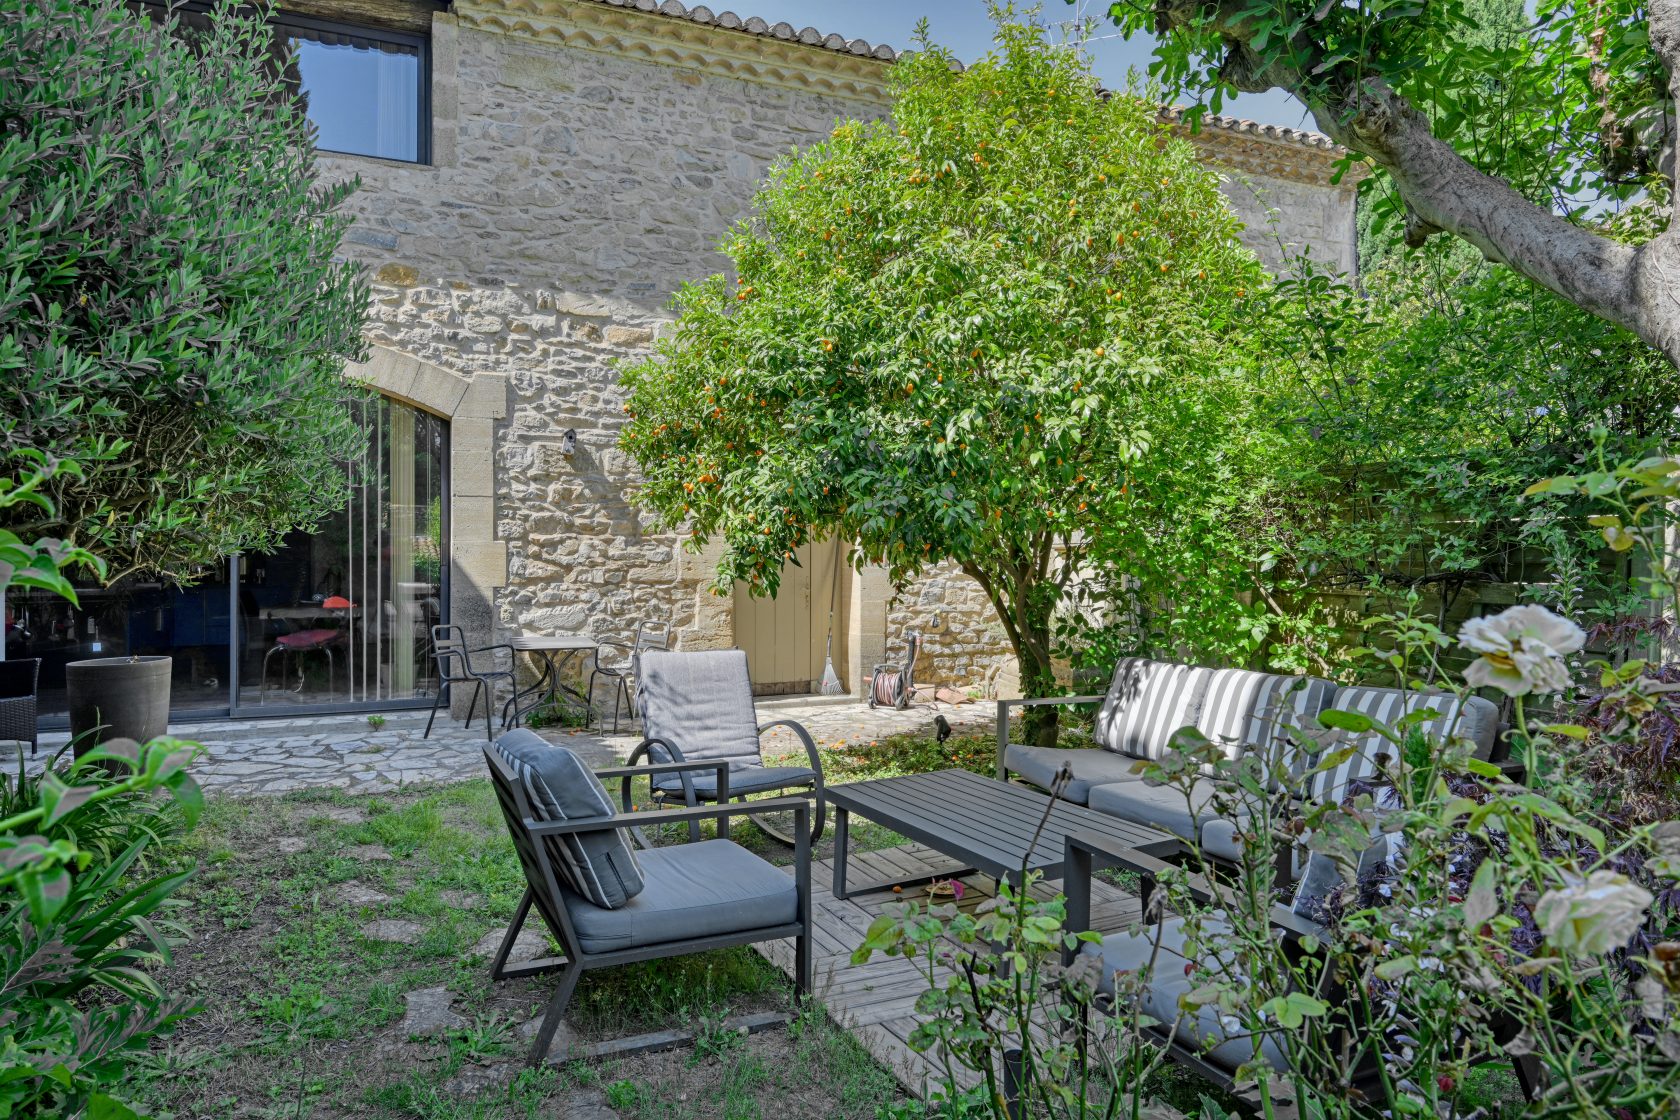 18th century farmhouse with swimming pool in the heart of the village